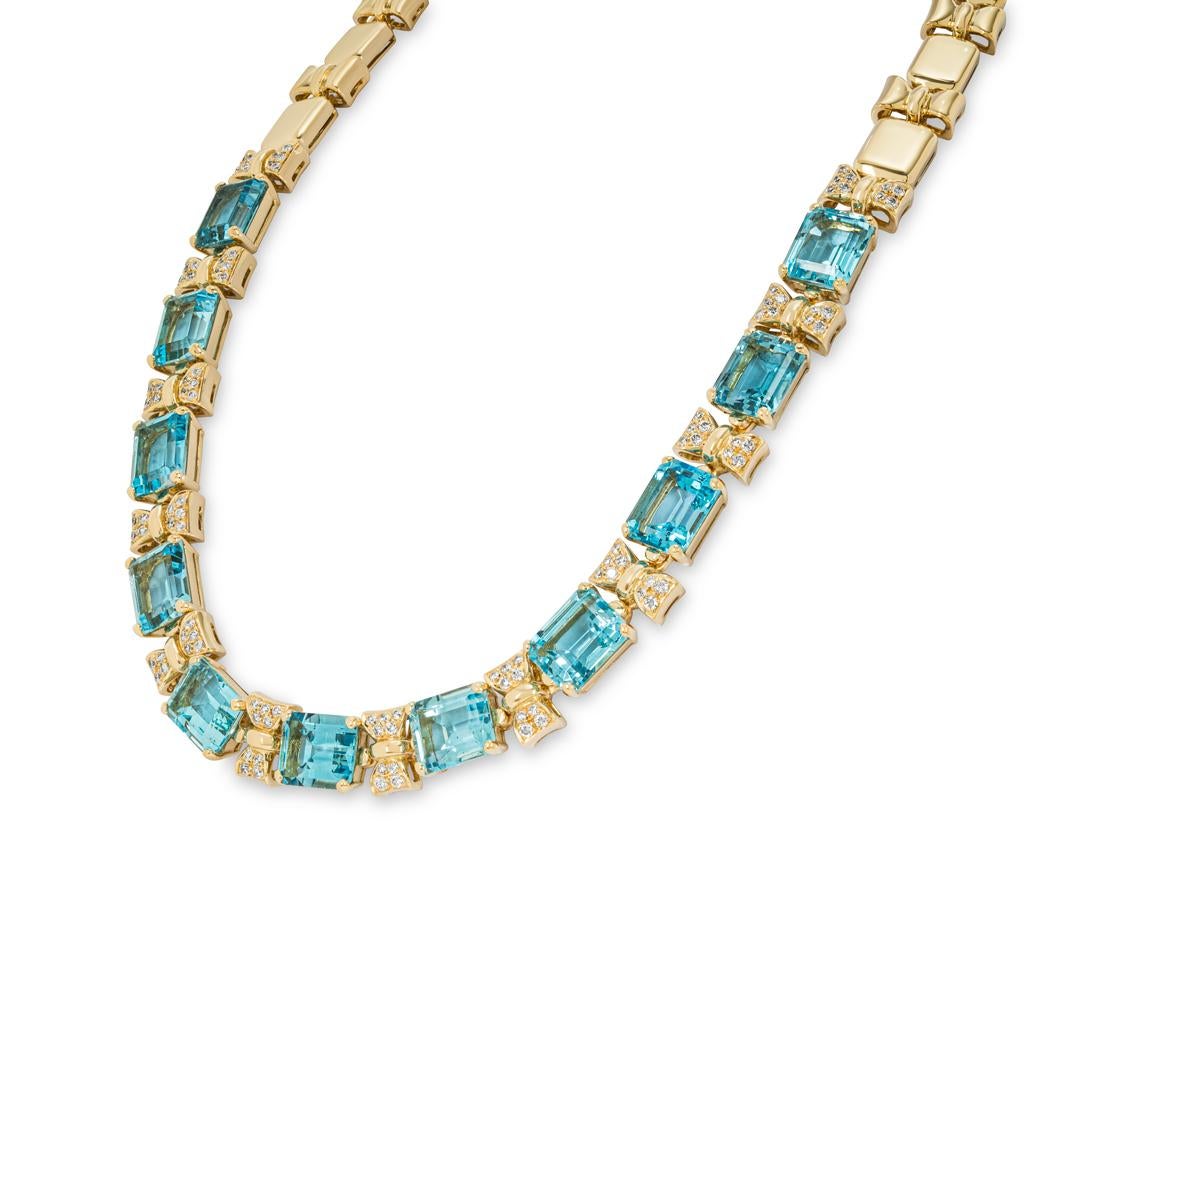 A classy 18k yellow gold topaz and diamond collar necklace. The front of the necklace features topaz alternating with diamond set bow motifs, whereas the back of the necklace features a high polish rectangle link alternating with a high polish bow